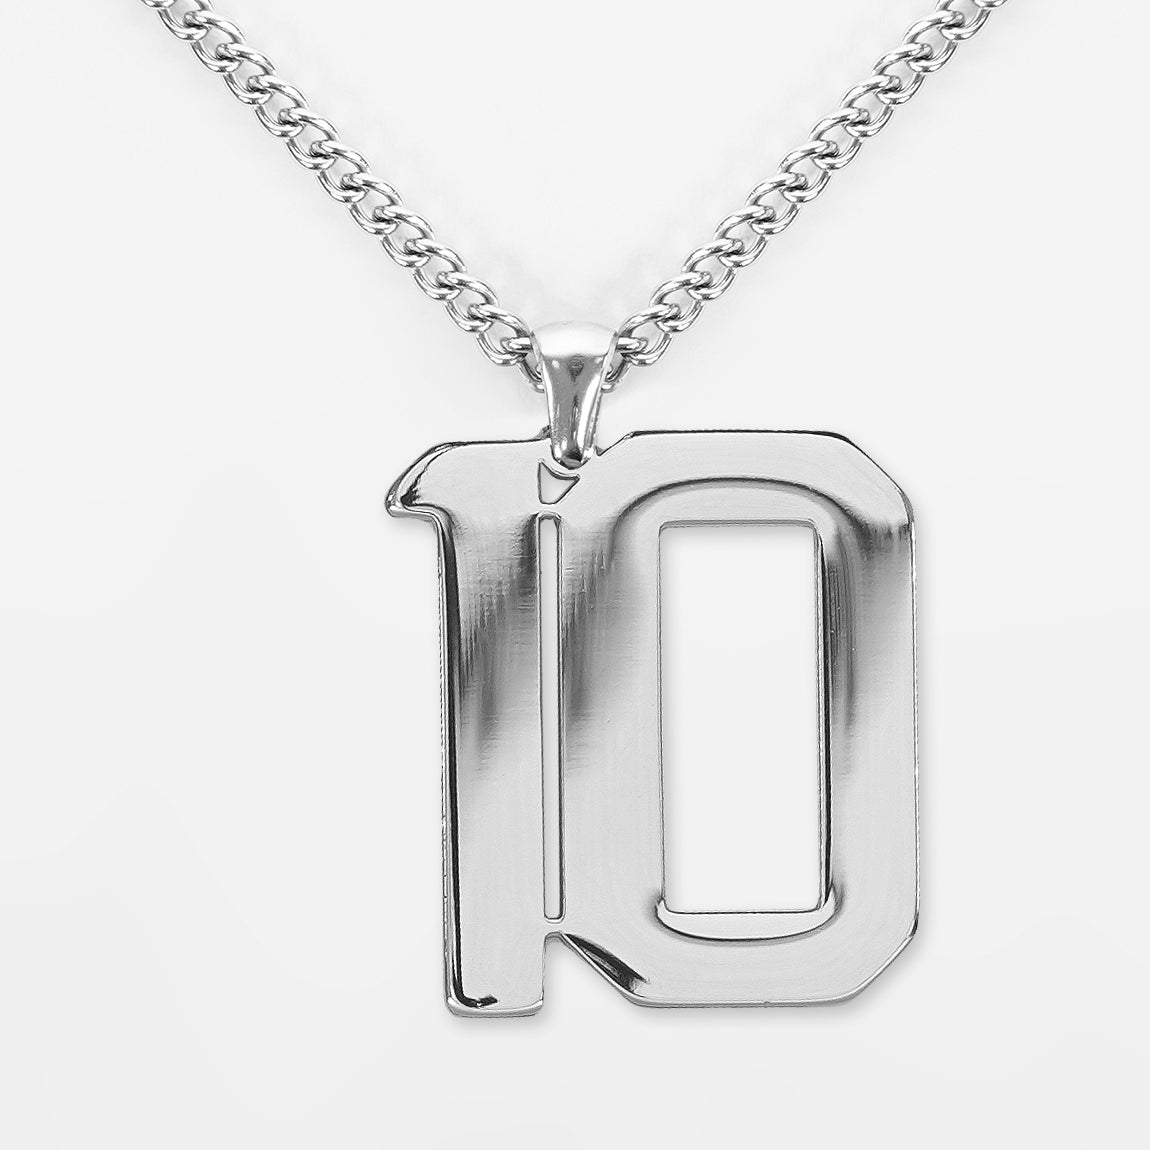 10 Number Pendant with Chain Necklace - Stainless Steel